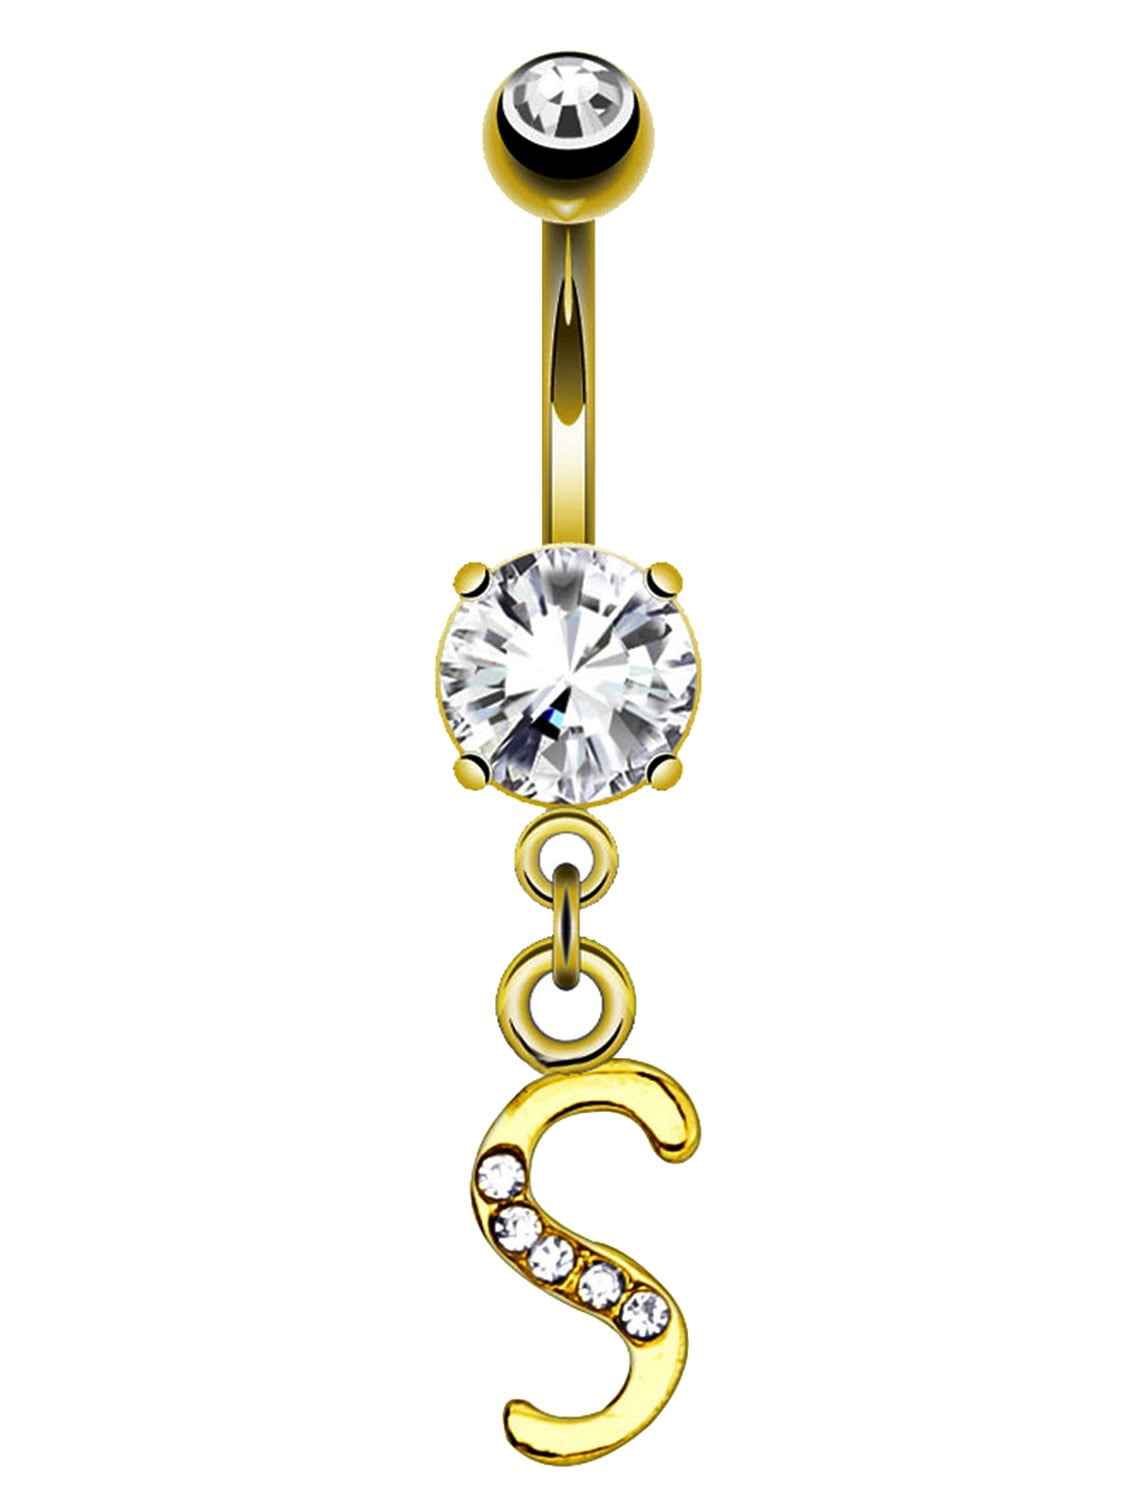 Details about   14G Double Heart CZ  Dangle Belly Button Ring Surgical Steel Piercing Navel Bar 